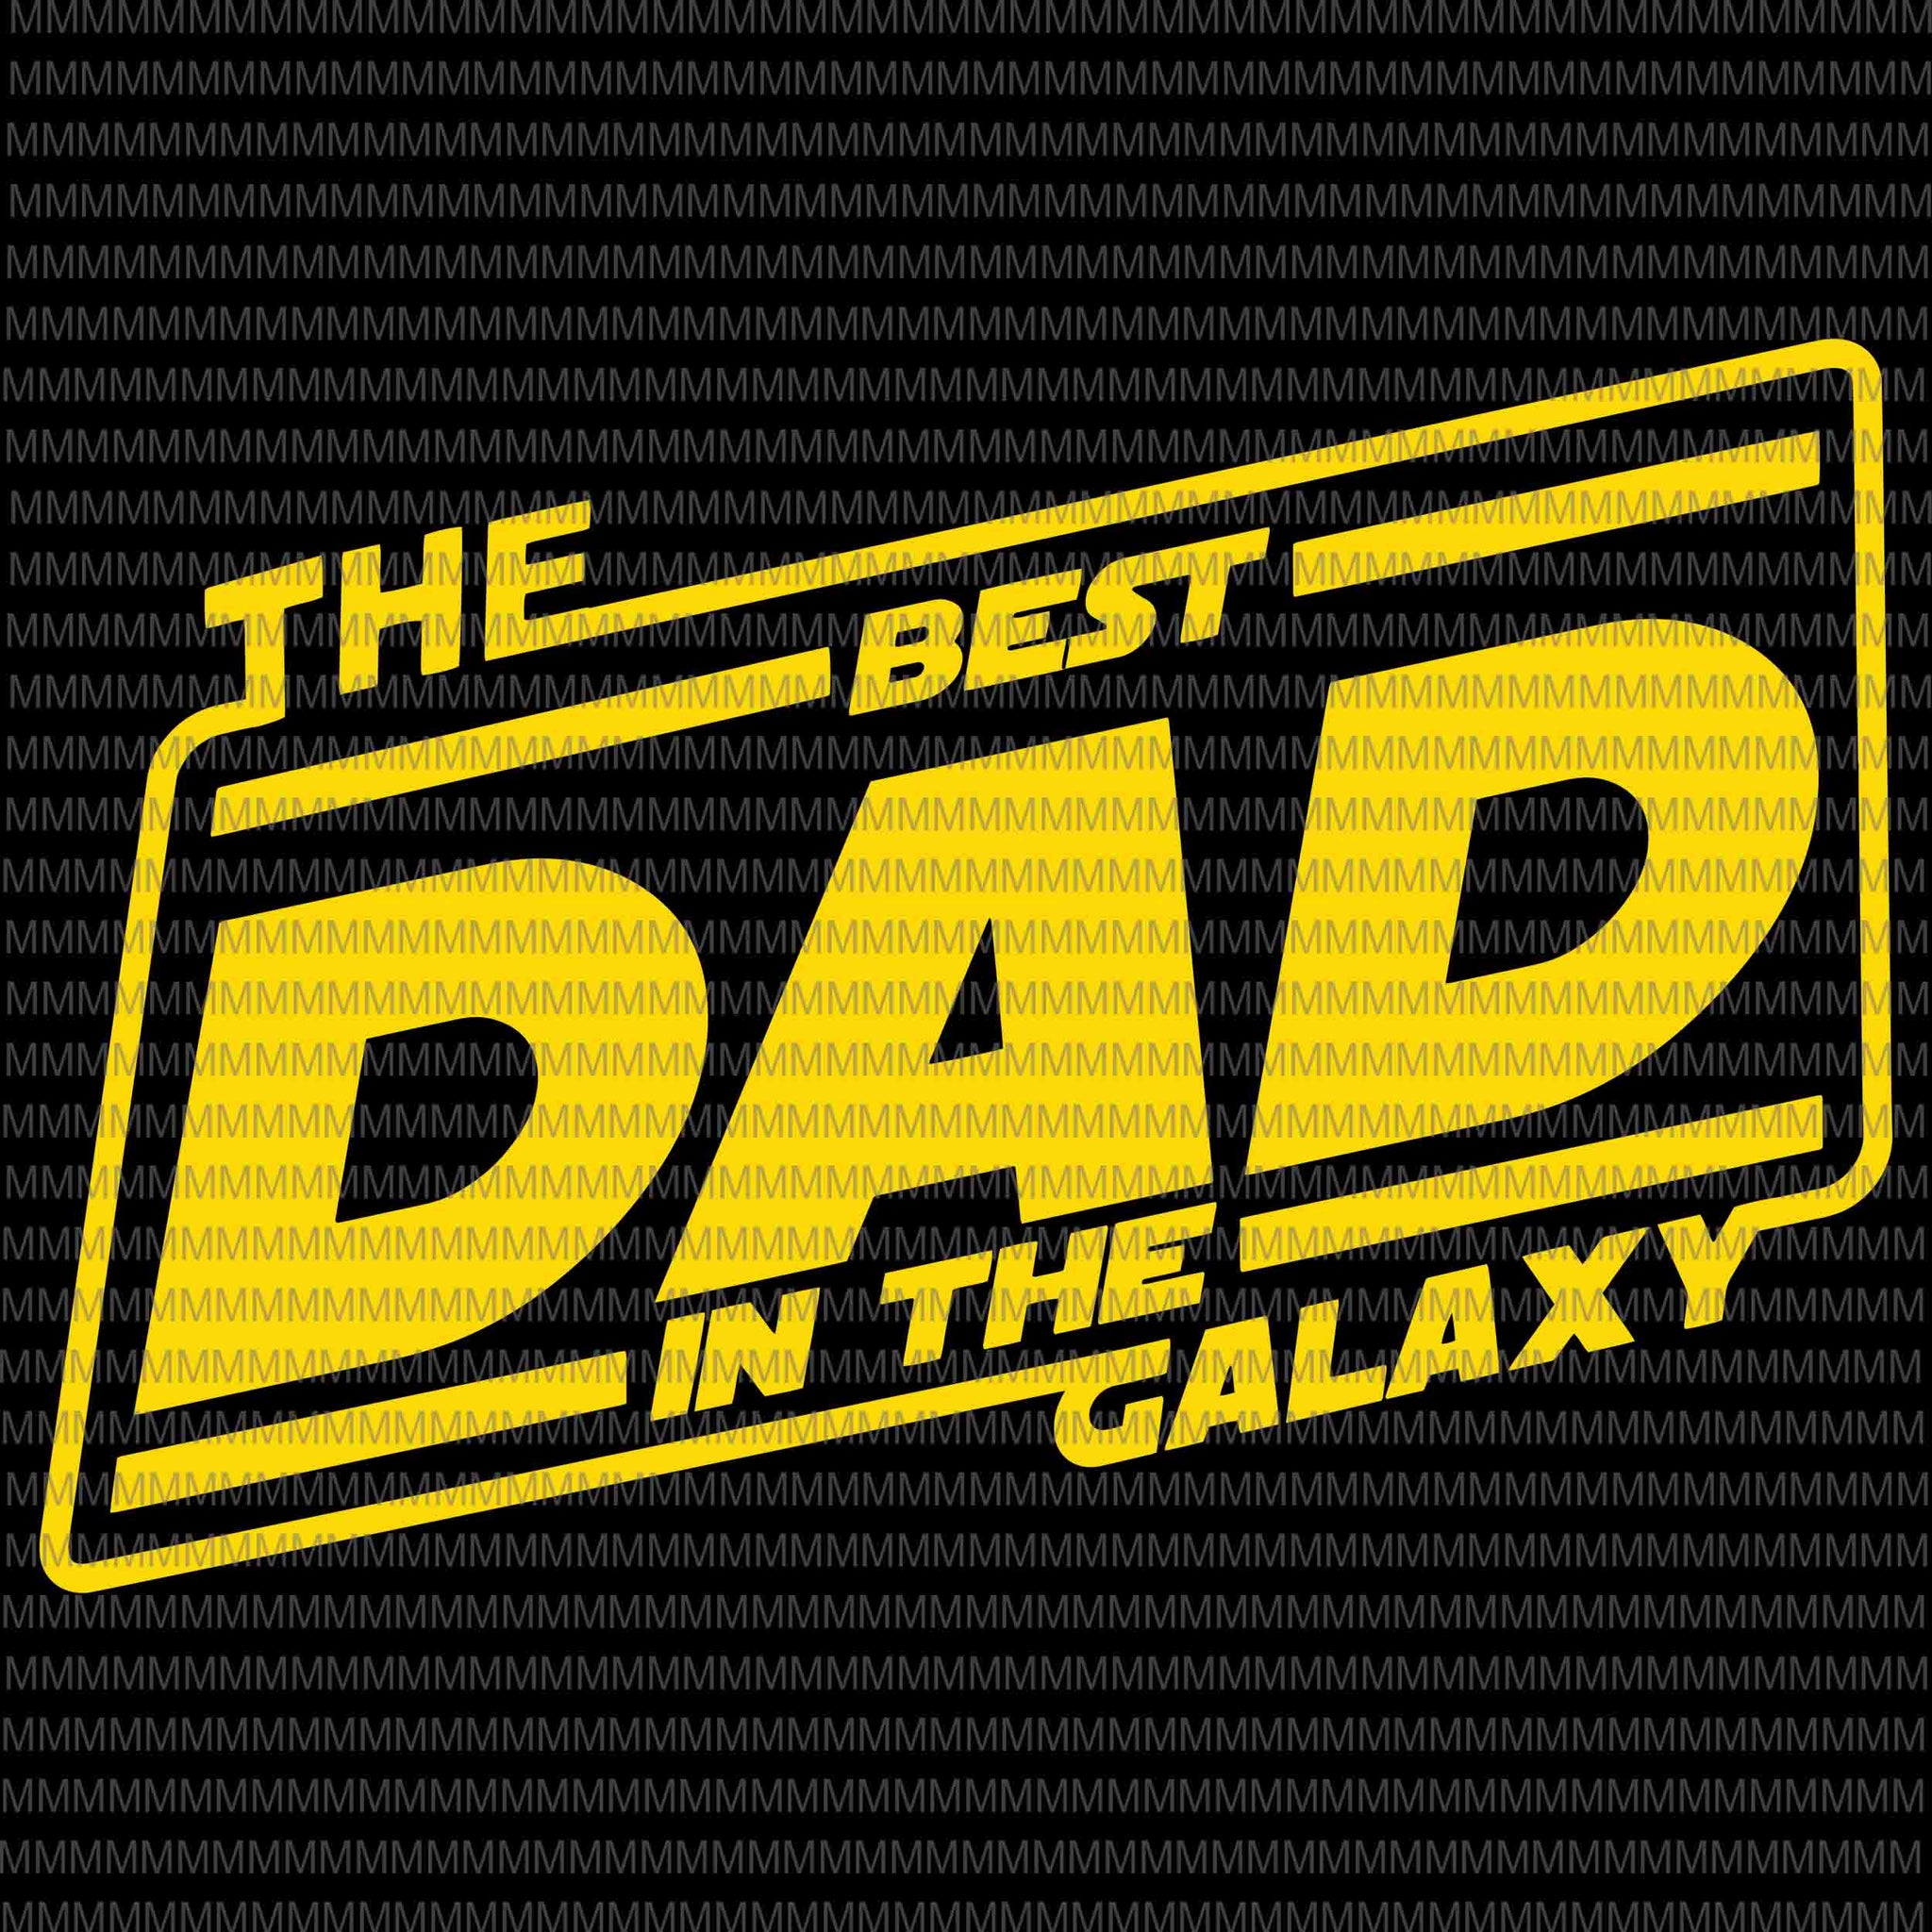 Best dad svg files for cut, Fathers day svg cut file, Father svg dxf instant download, Cheer Dad life, Star Wars vector files print ready t shirt design